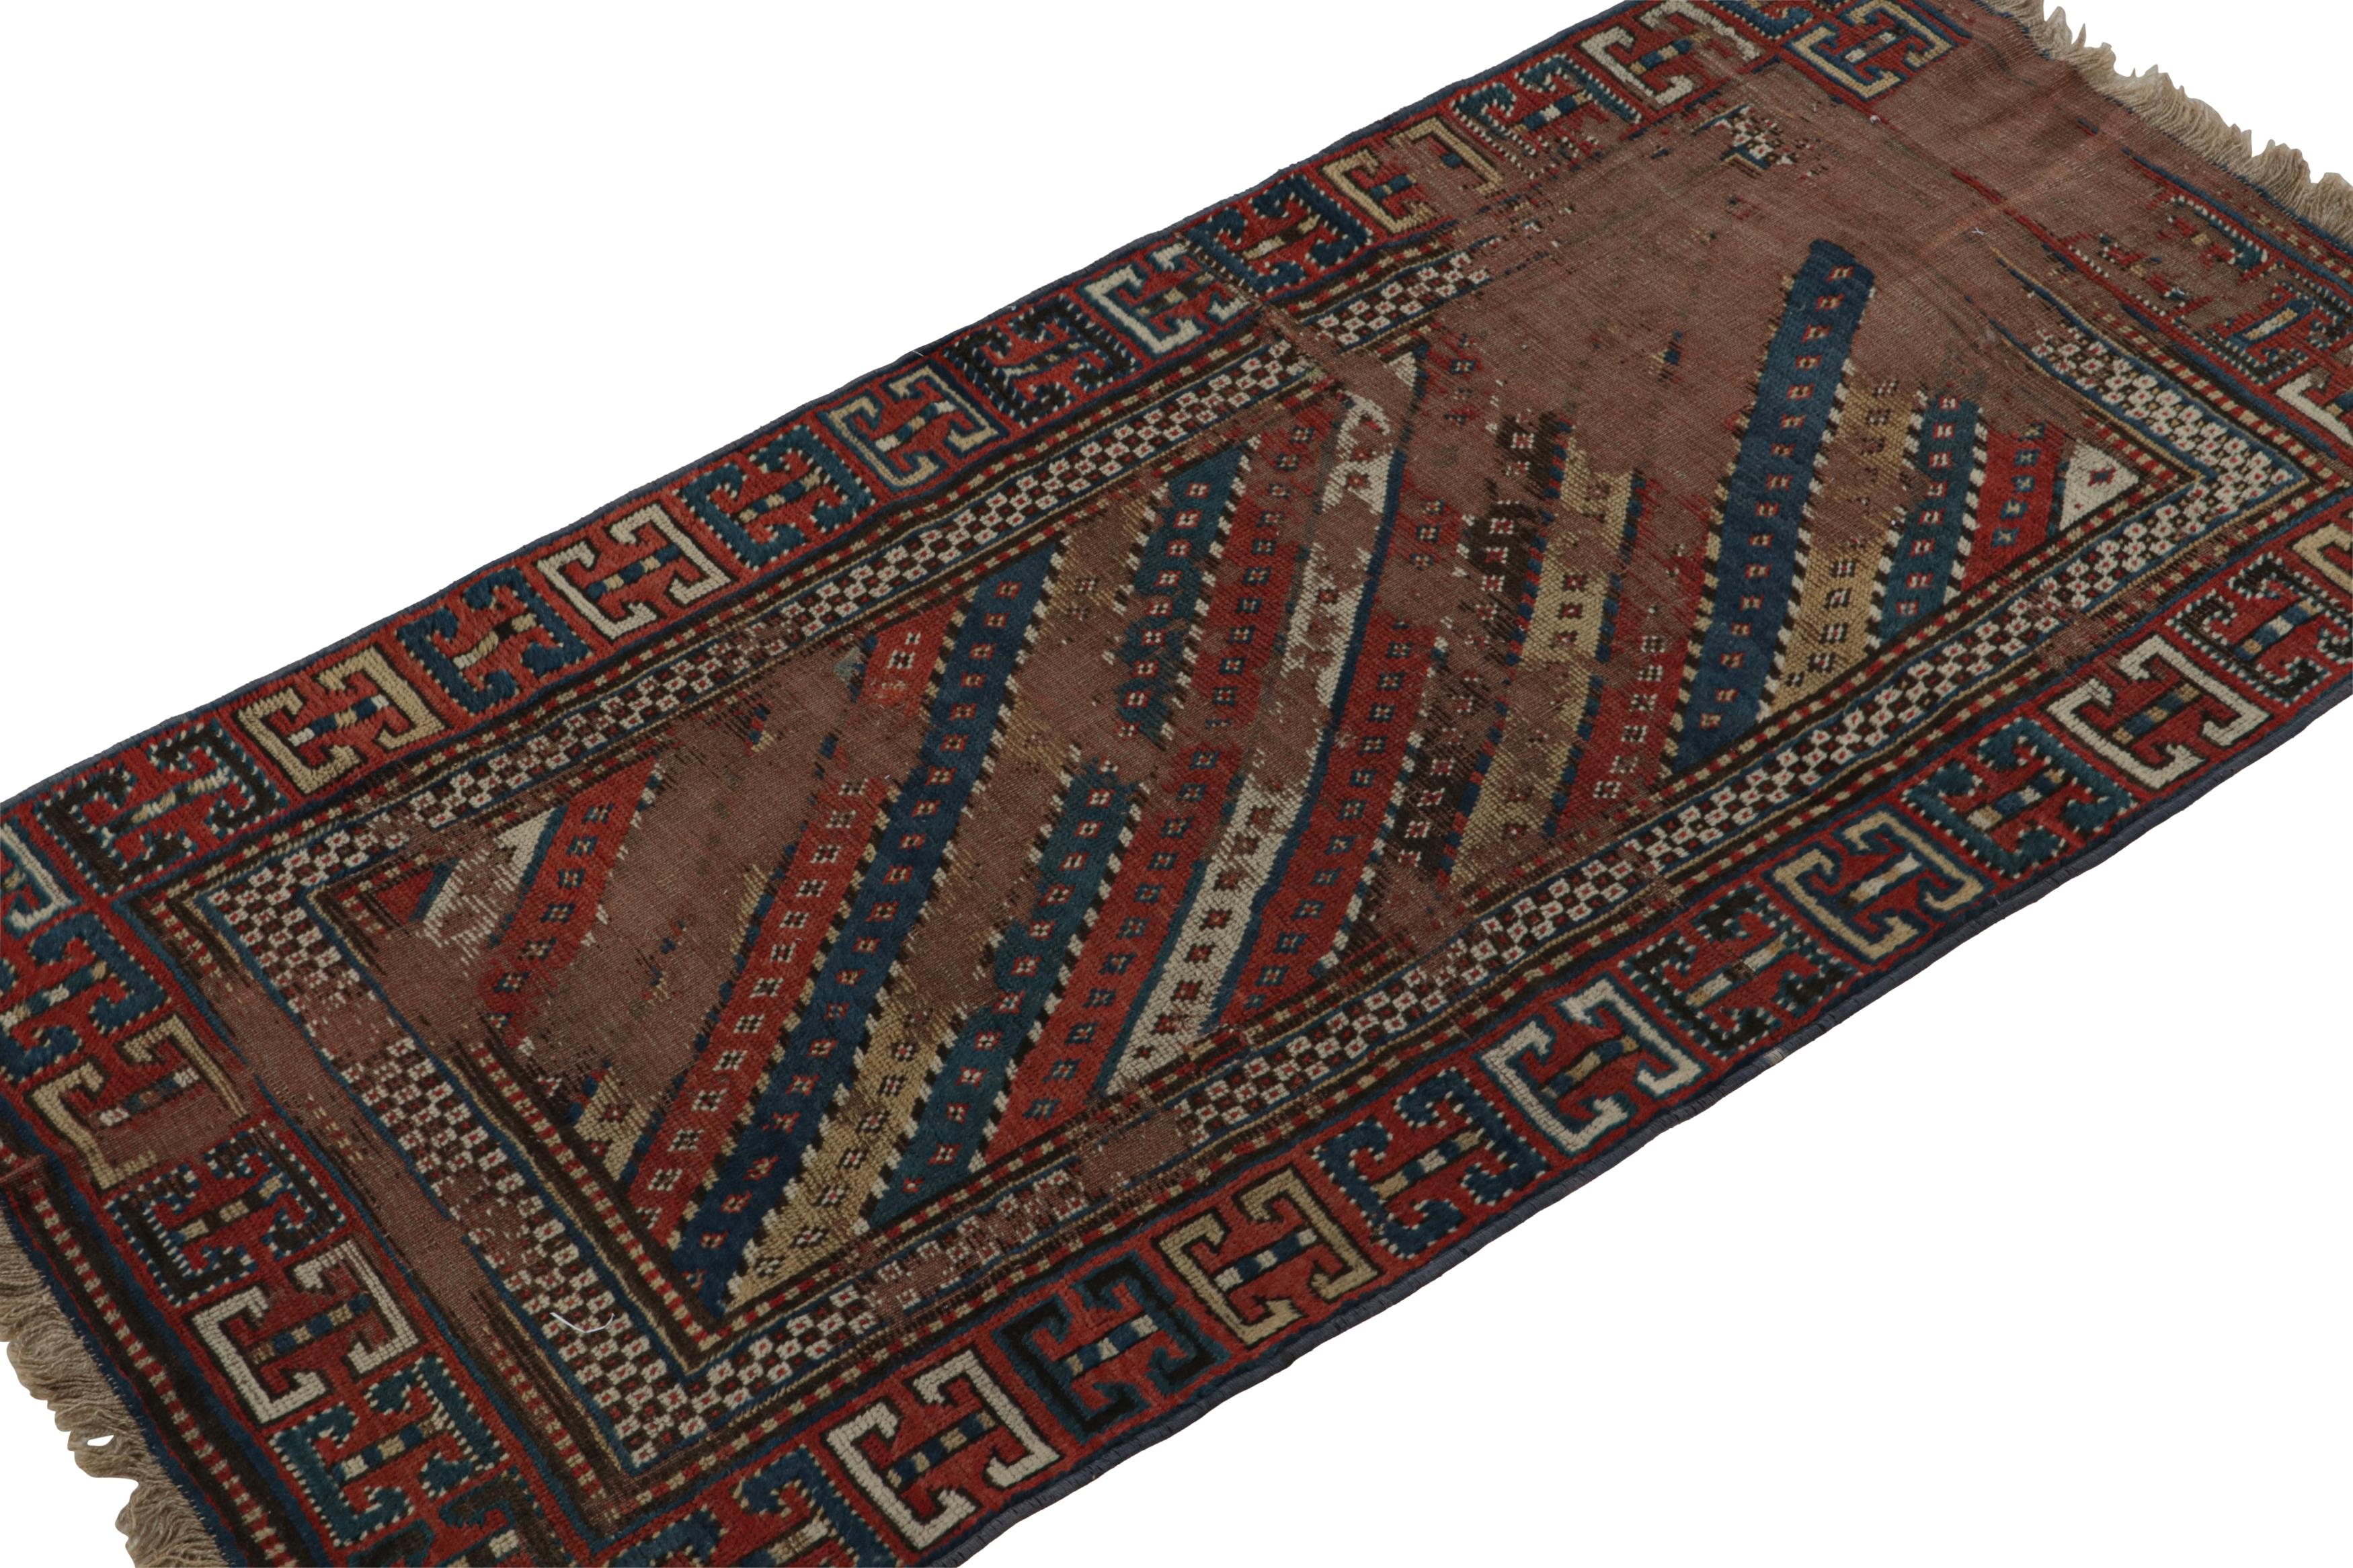 Hand-knotted in wool and hailing from Russia circa 1910-1920, this 3x6 antique Kazak runner rug is a rare Caucasian tribal curation from the collection by Rug & Kilim.  

On the Design:

This piece enjoys primitivist geometric patterns in brick red,